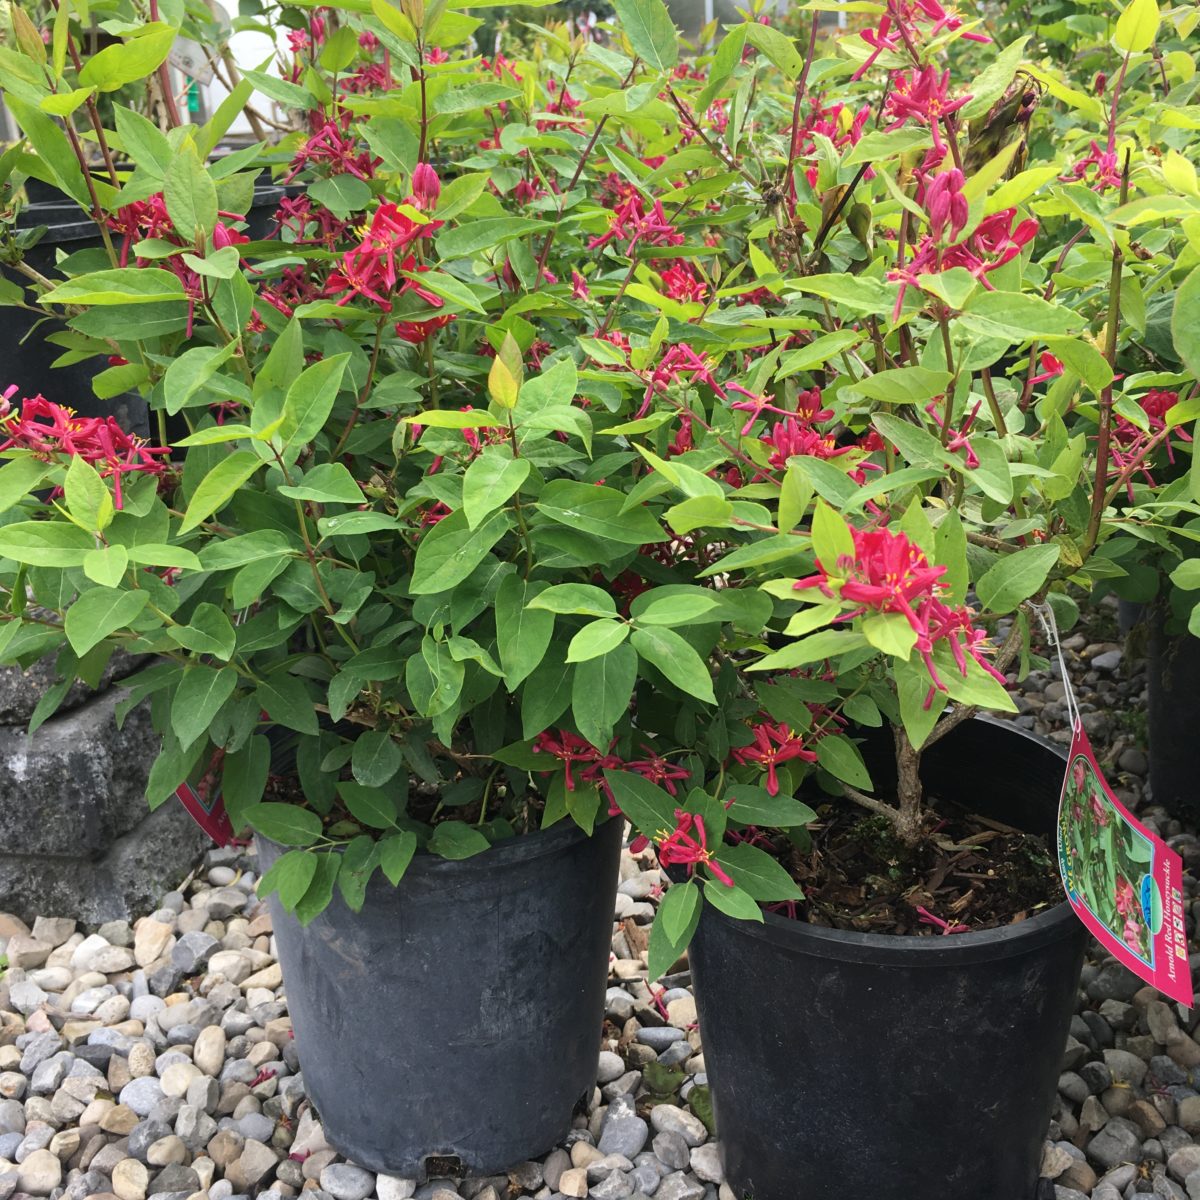 Arnold Red Honeysuckle (Lonicera tatarica 'Arnold Red') - 3 Gallon Potted Shrub (40cm)